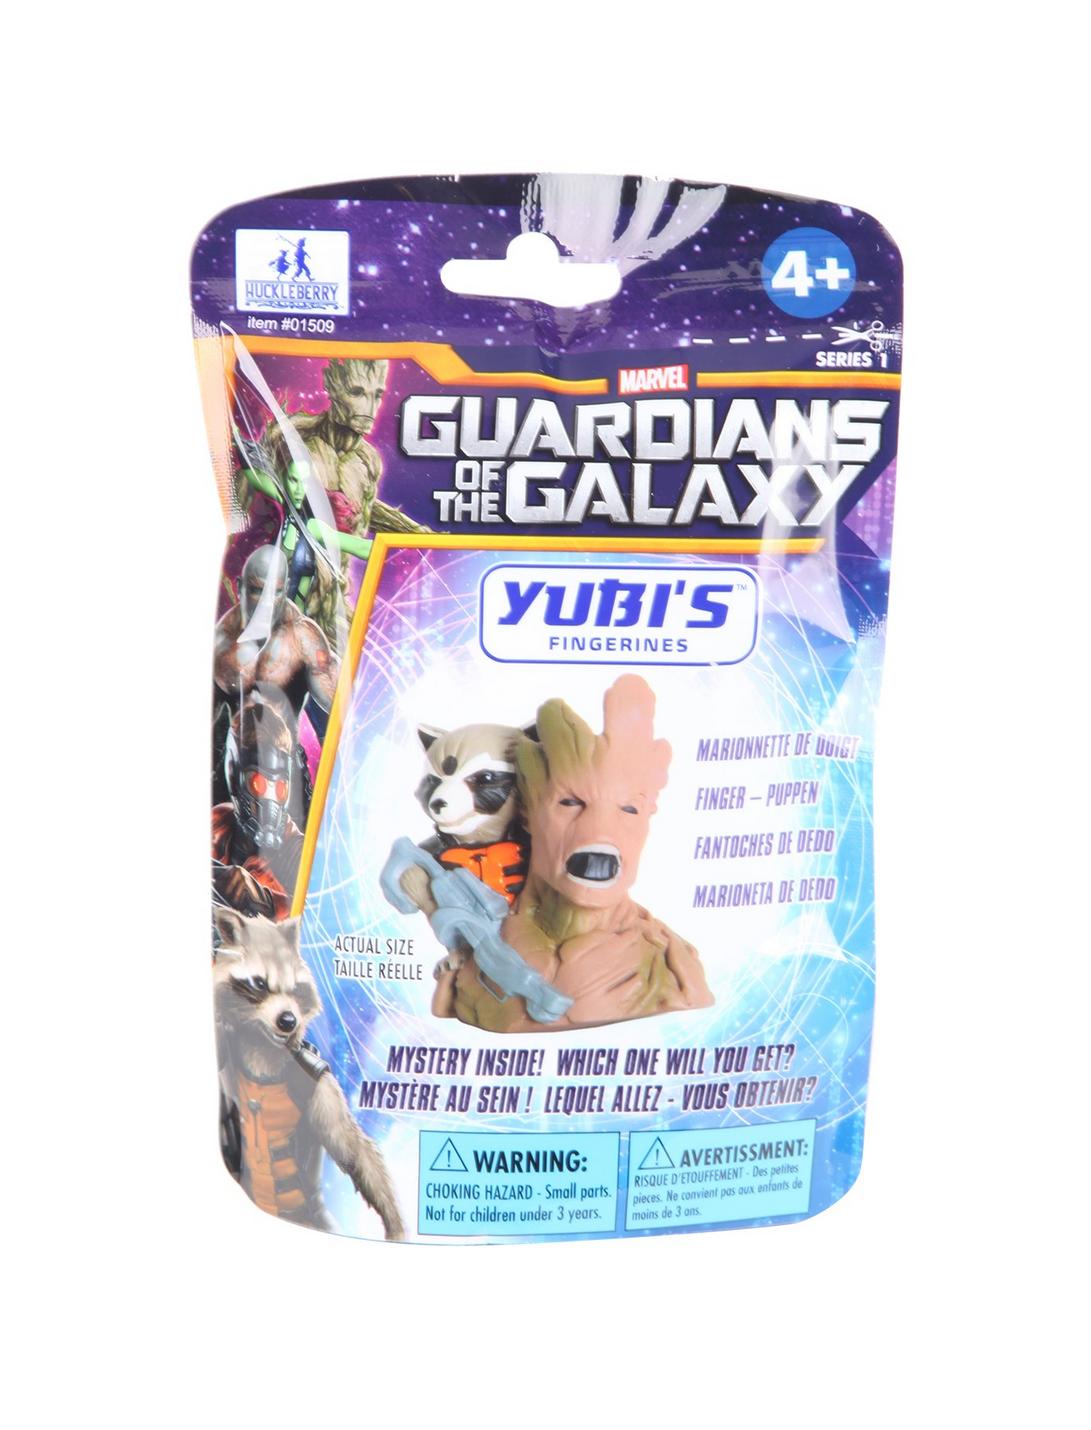 ONE BLIND BAG GUARDIANS OF THE GALAXY YUBI'S FINGERINES SERIES 1 